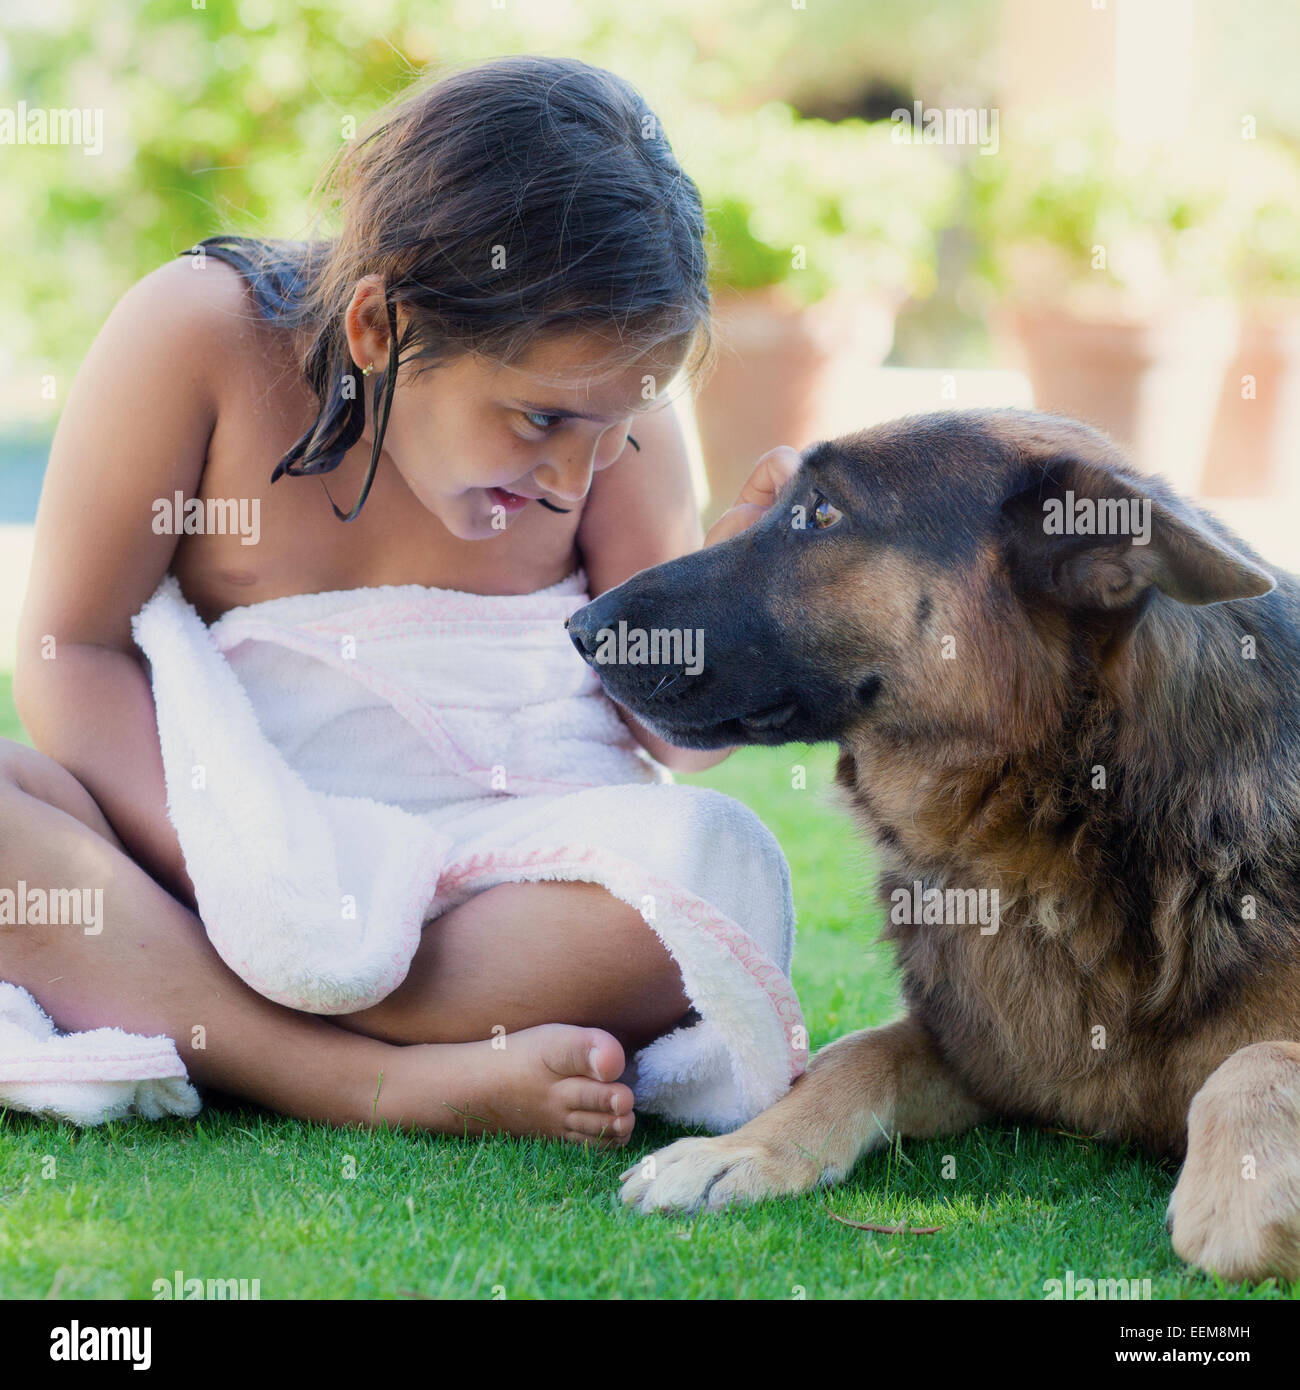 Girl wrapped in a towel sitting on grass next to her dog Stock Photo